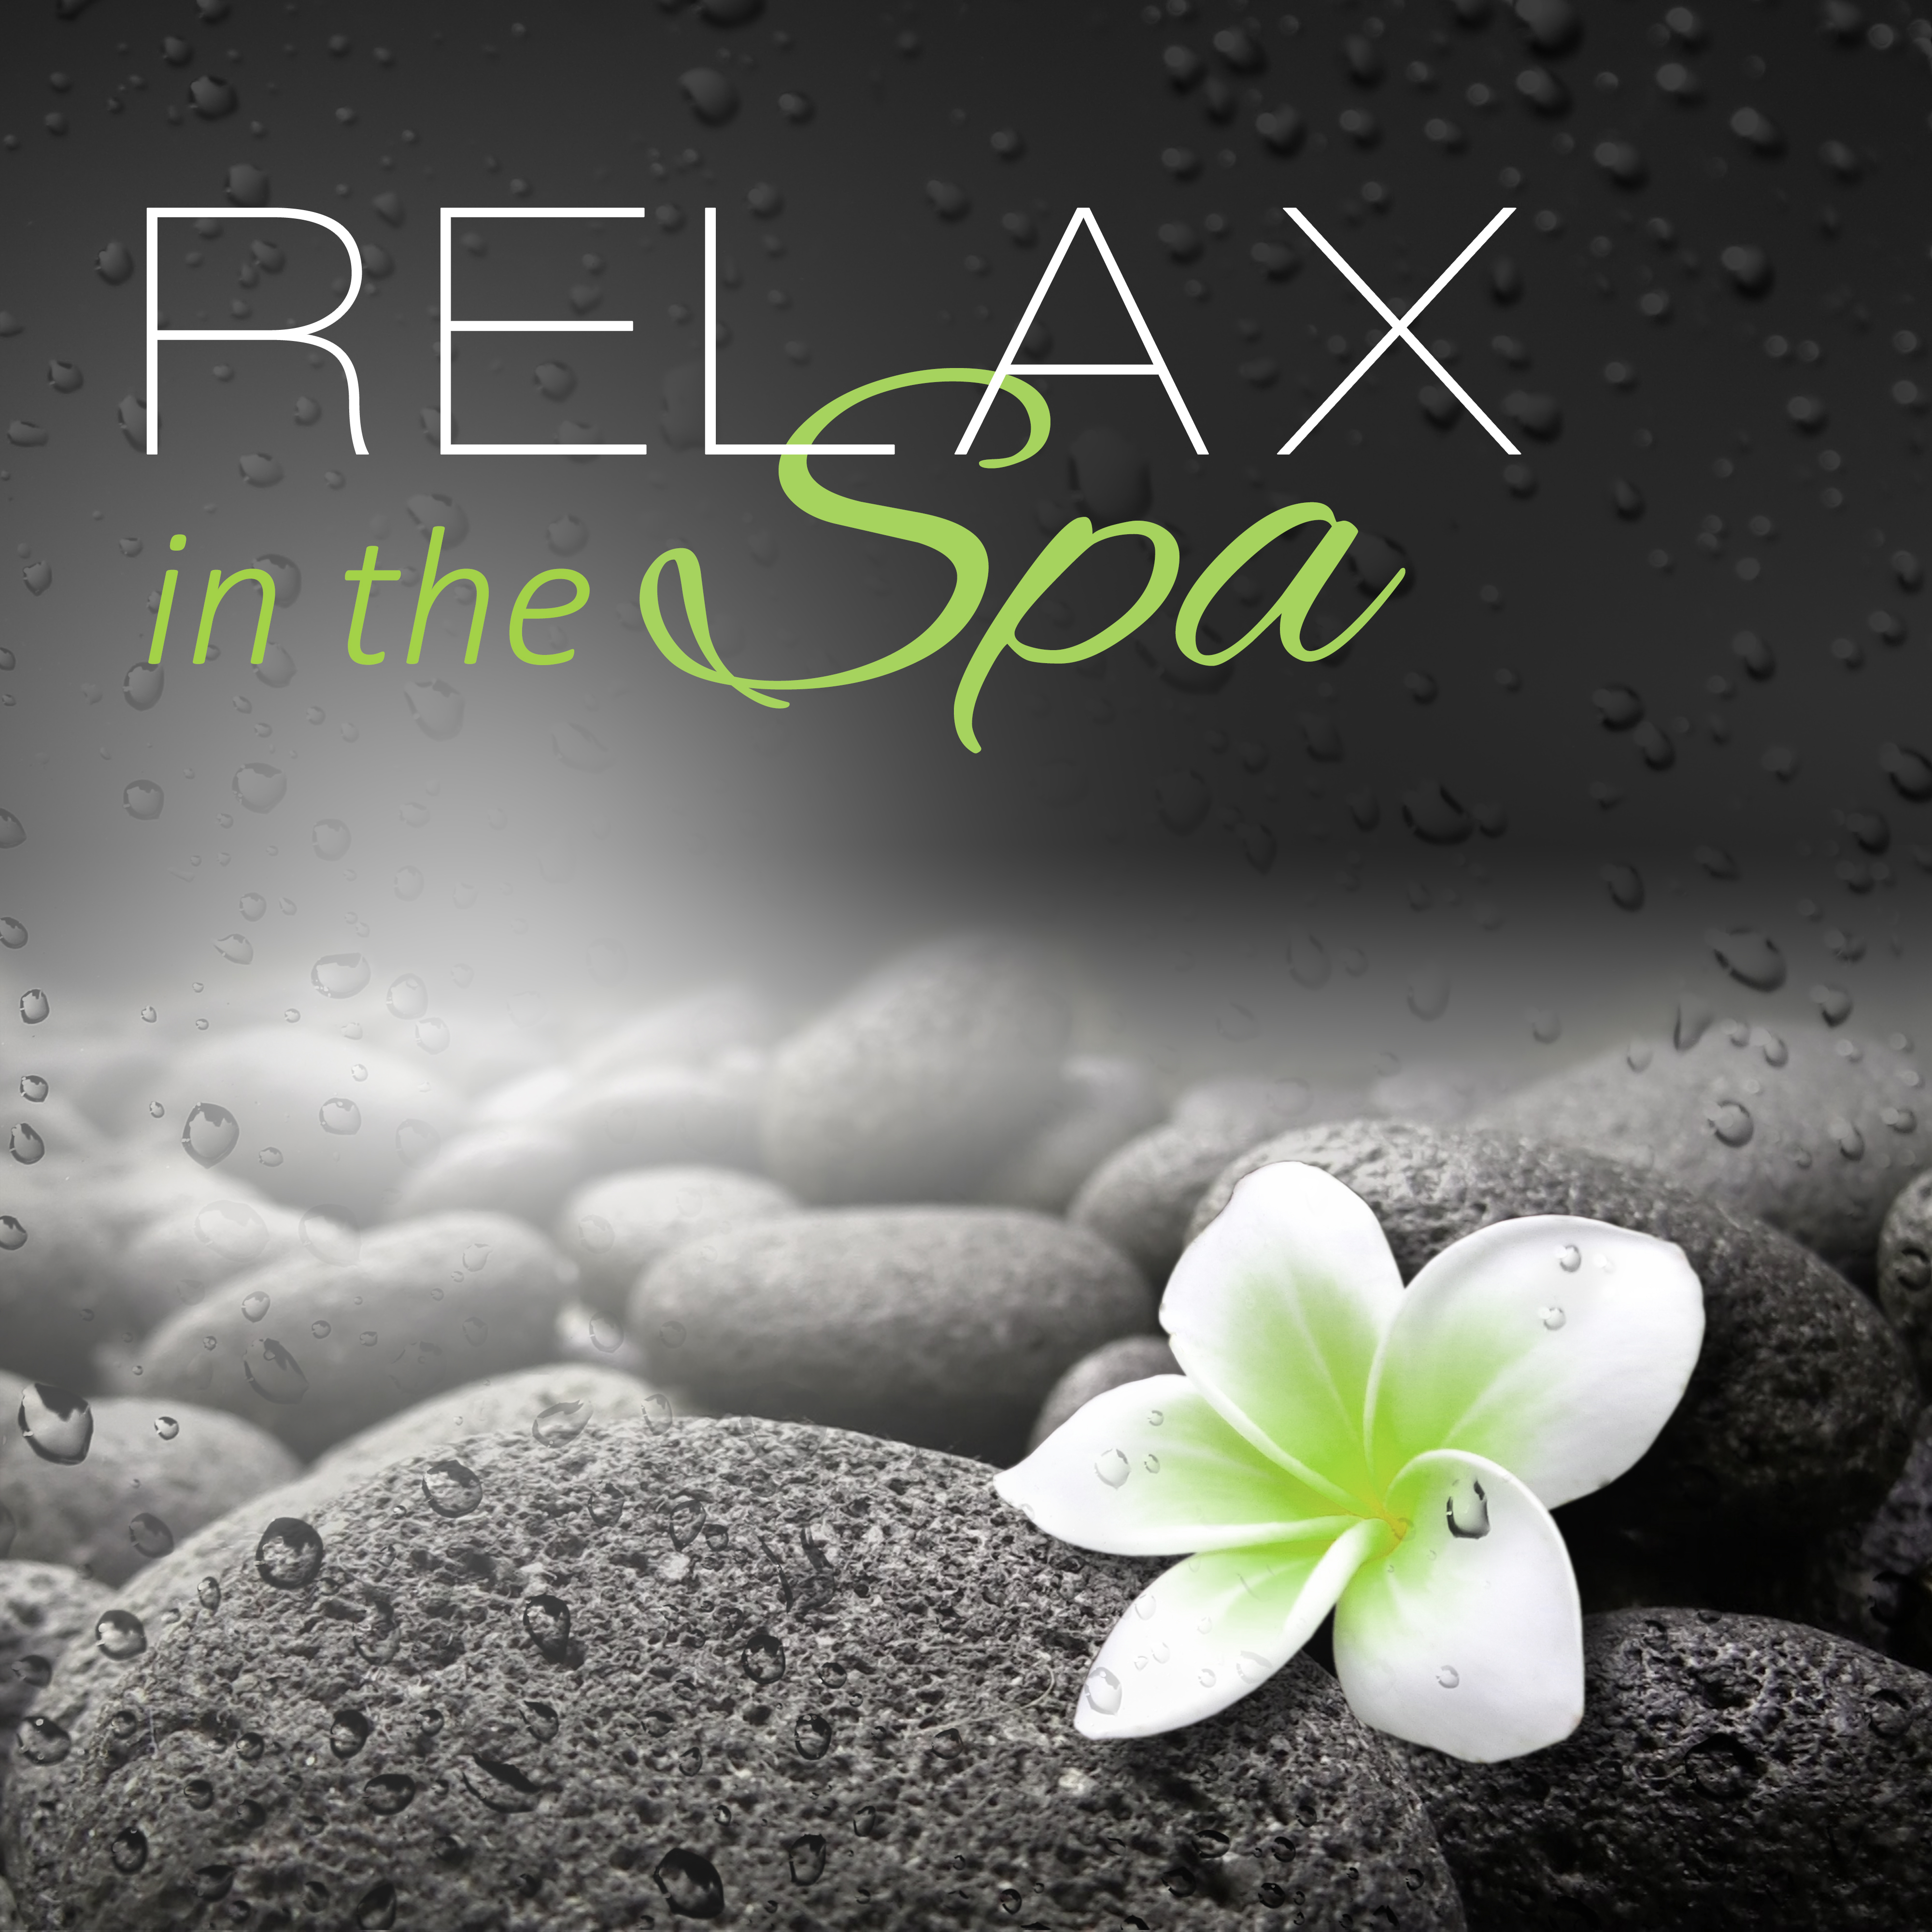 Relax in the SPA  Positive Vibration, Calming, Water, Wind